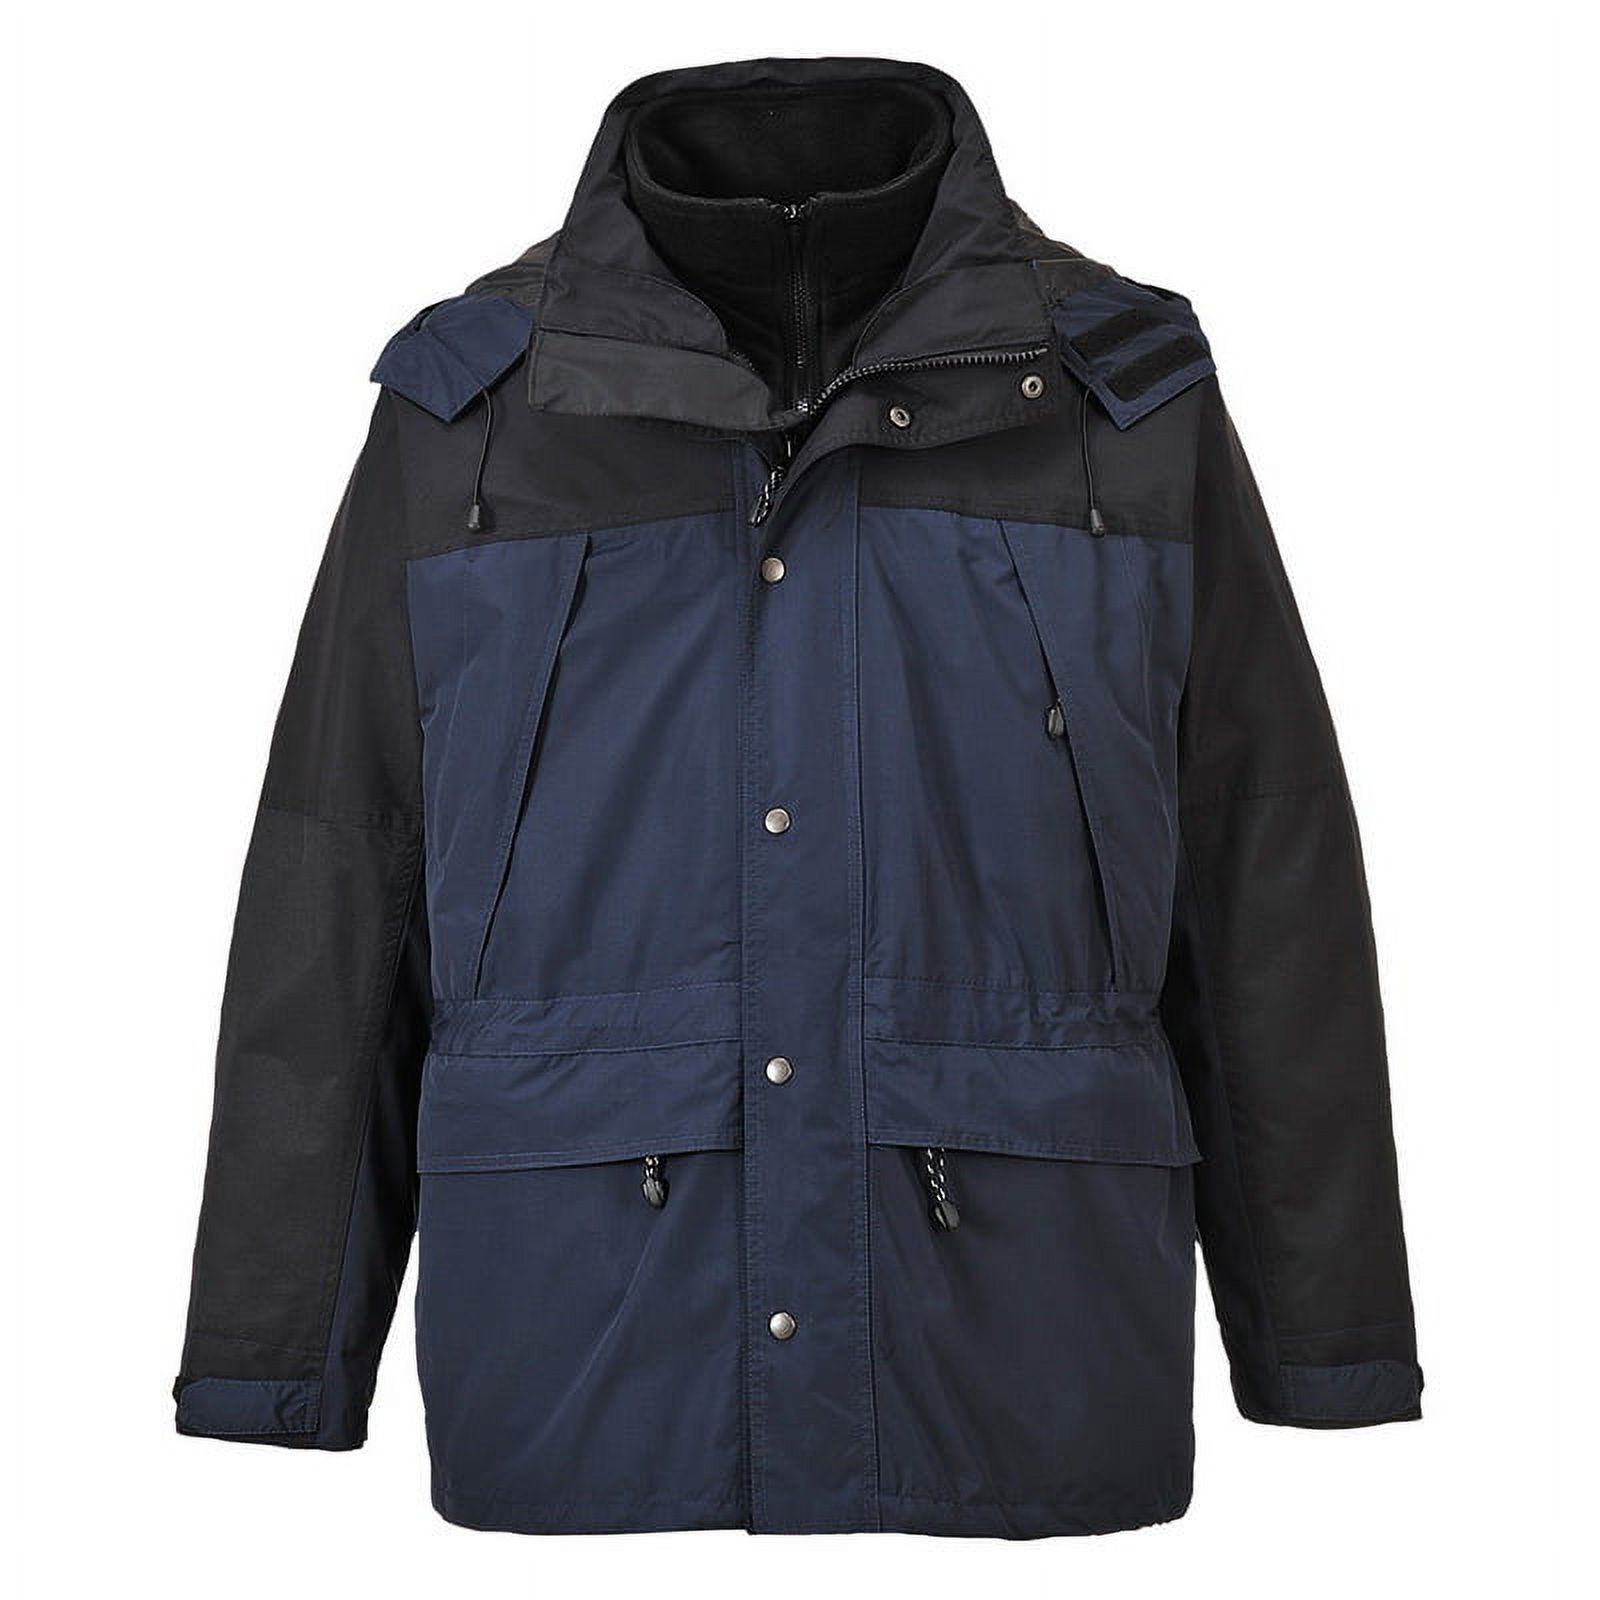 Portwest S532 Orkney 3 in 1 Waterproof Breathable All Weather Jacket Gray, Large - image 2 of 4